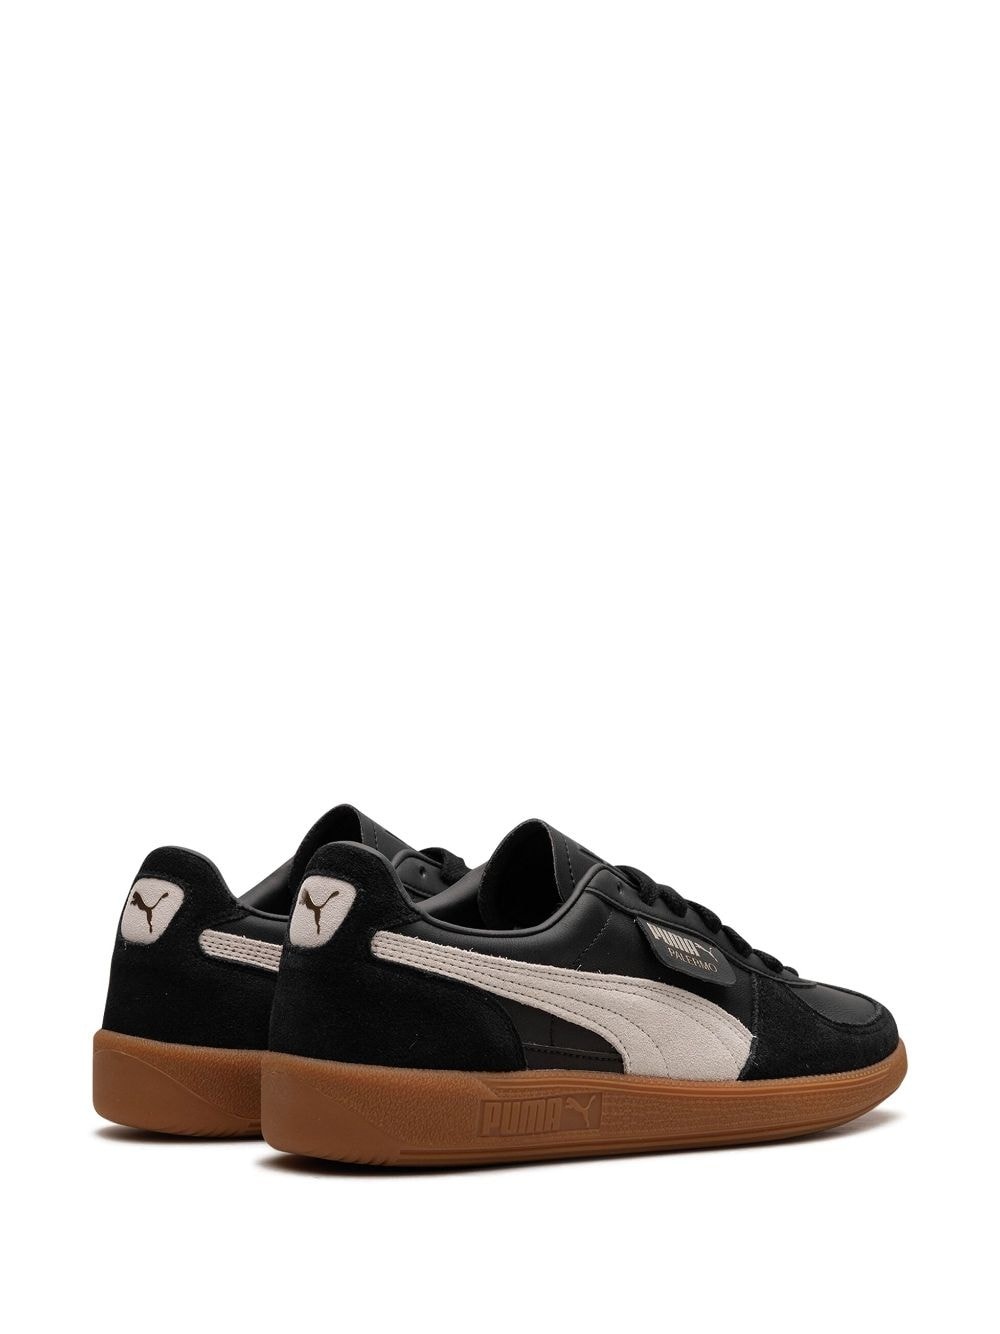 Palermo "Puma Black/Feather Gray/Gum" sneakers - 3